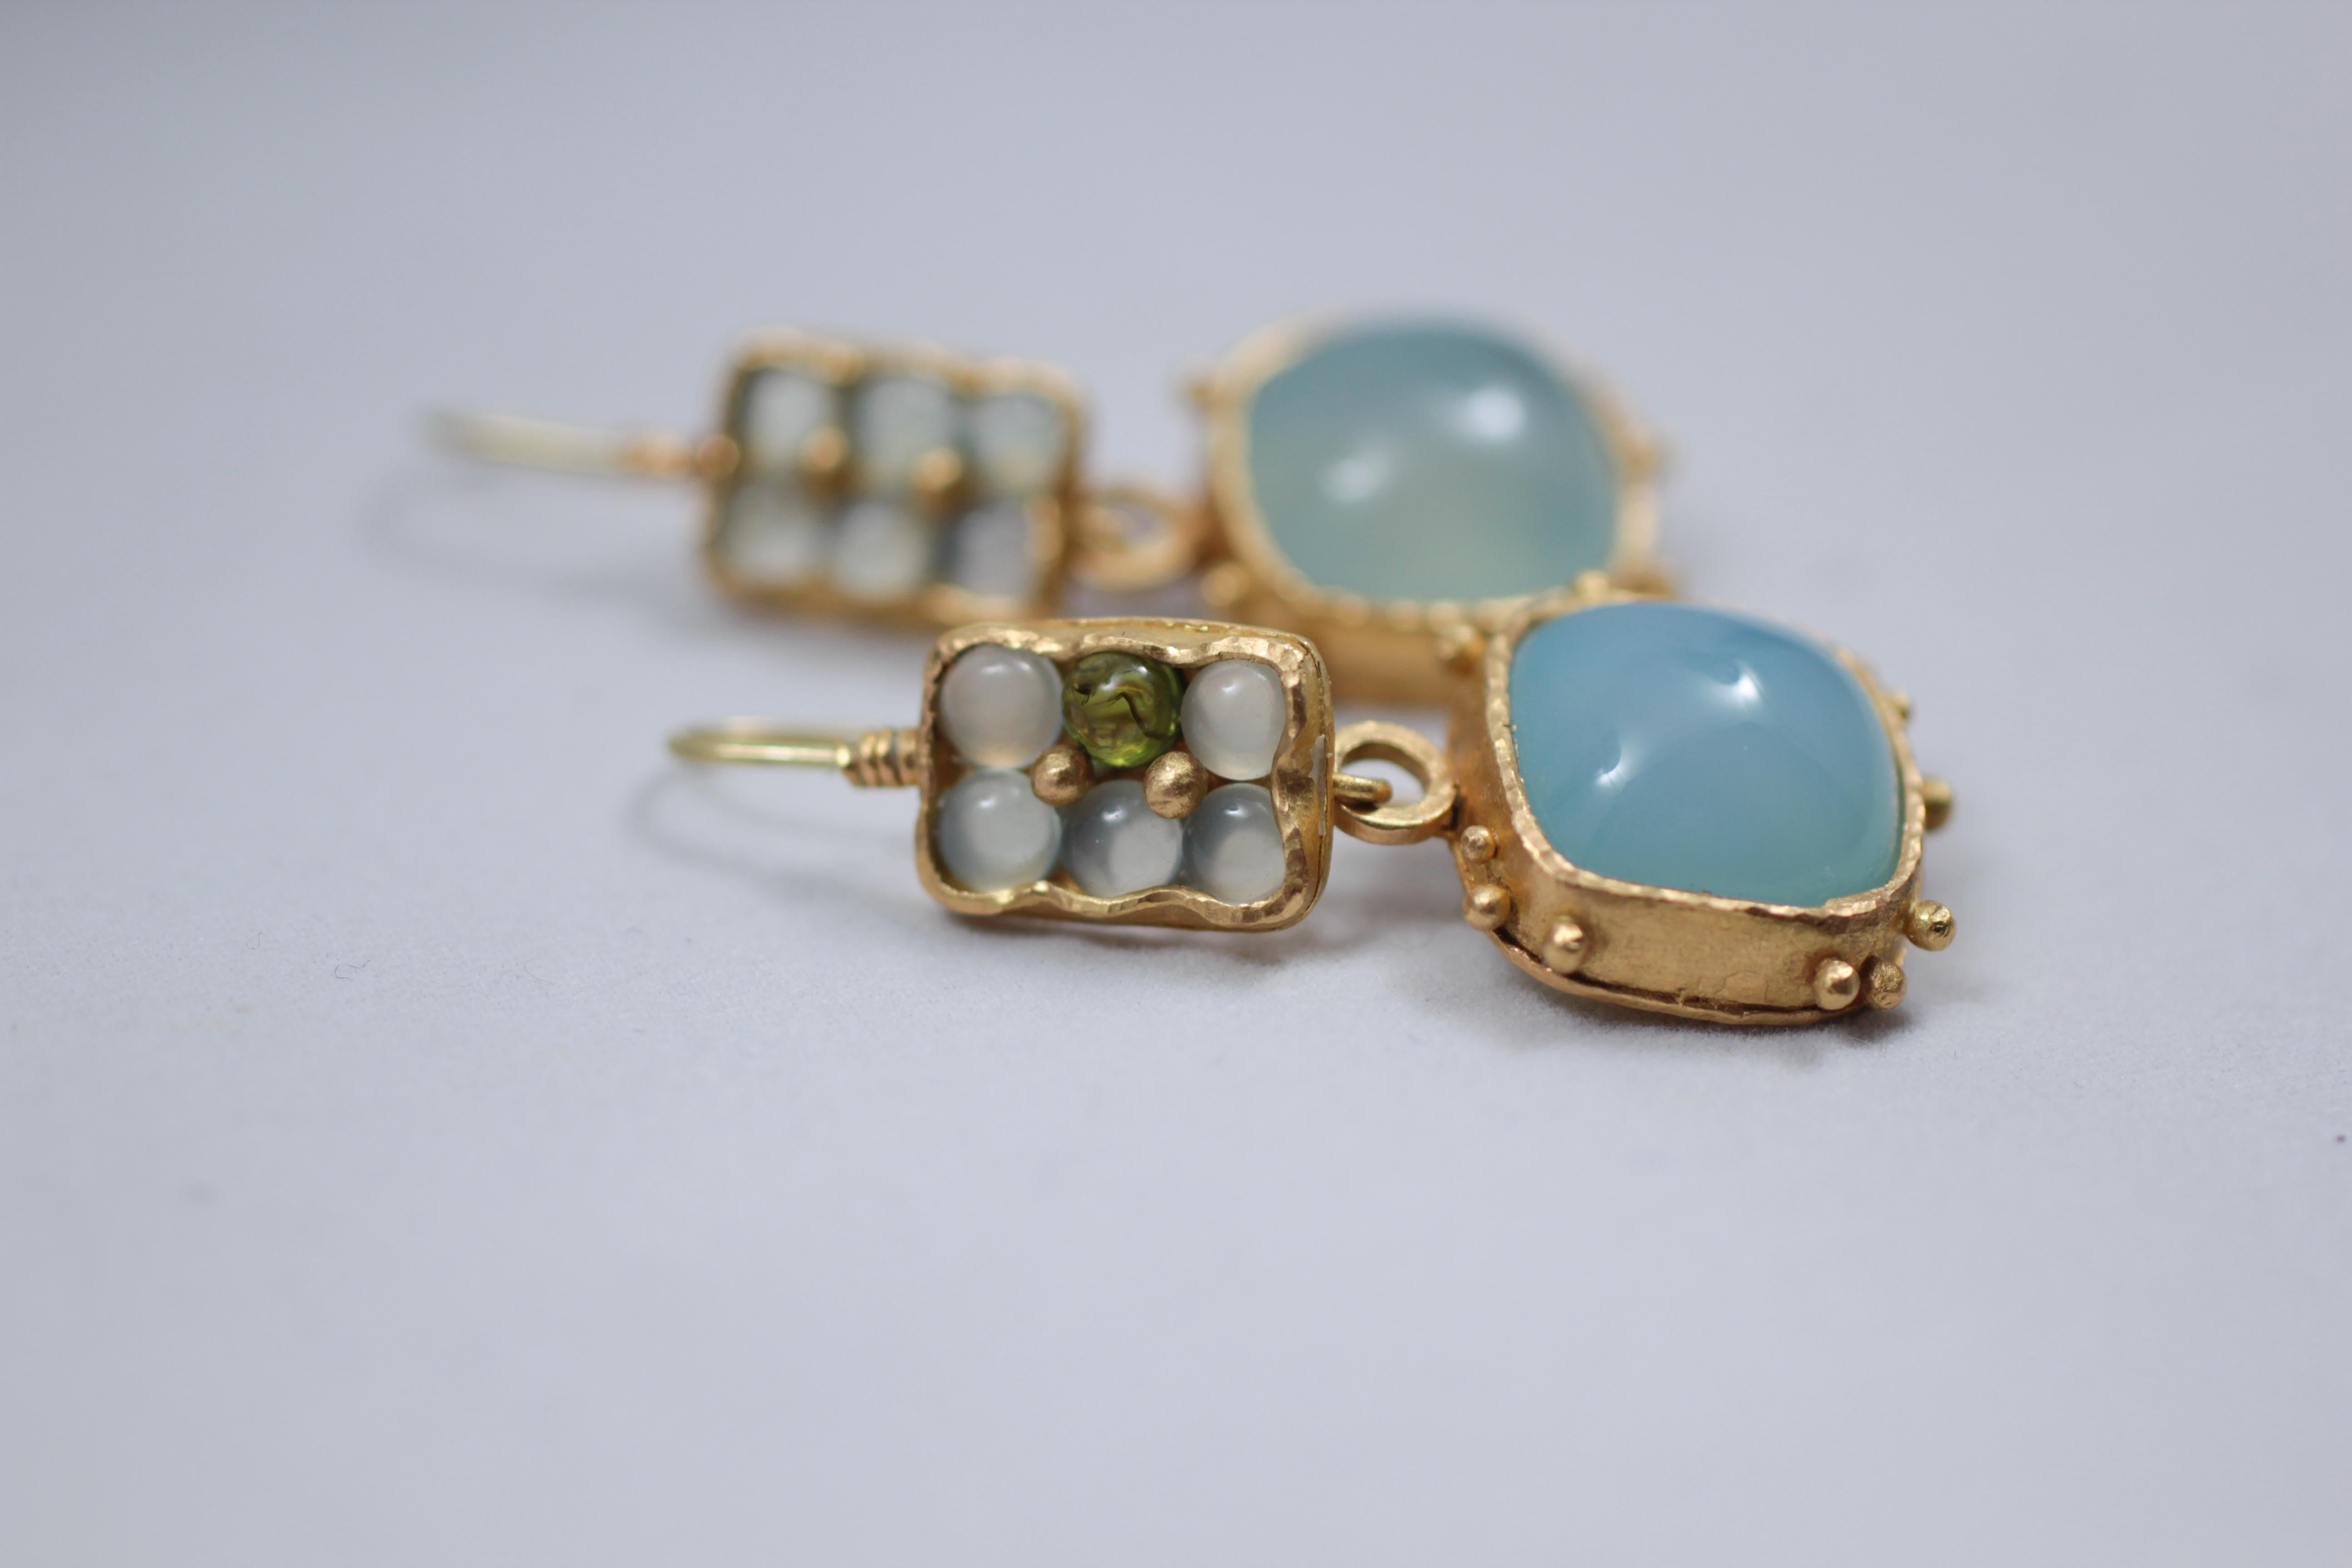 Watercolor Dangle Drop Earrings. Textured 21k solid gold handcrafted earrings featuring light blue chalcedony cabochon drops. Chalcedony and tourmaline small round cabs are set in whimsical bezels. Perfect for every occasion. Beautiful light blue